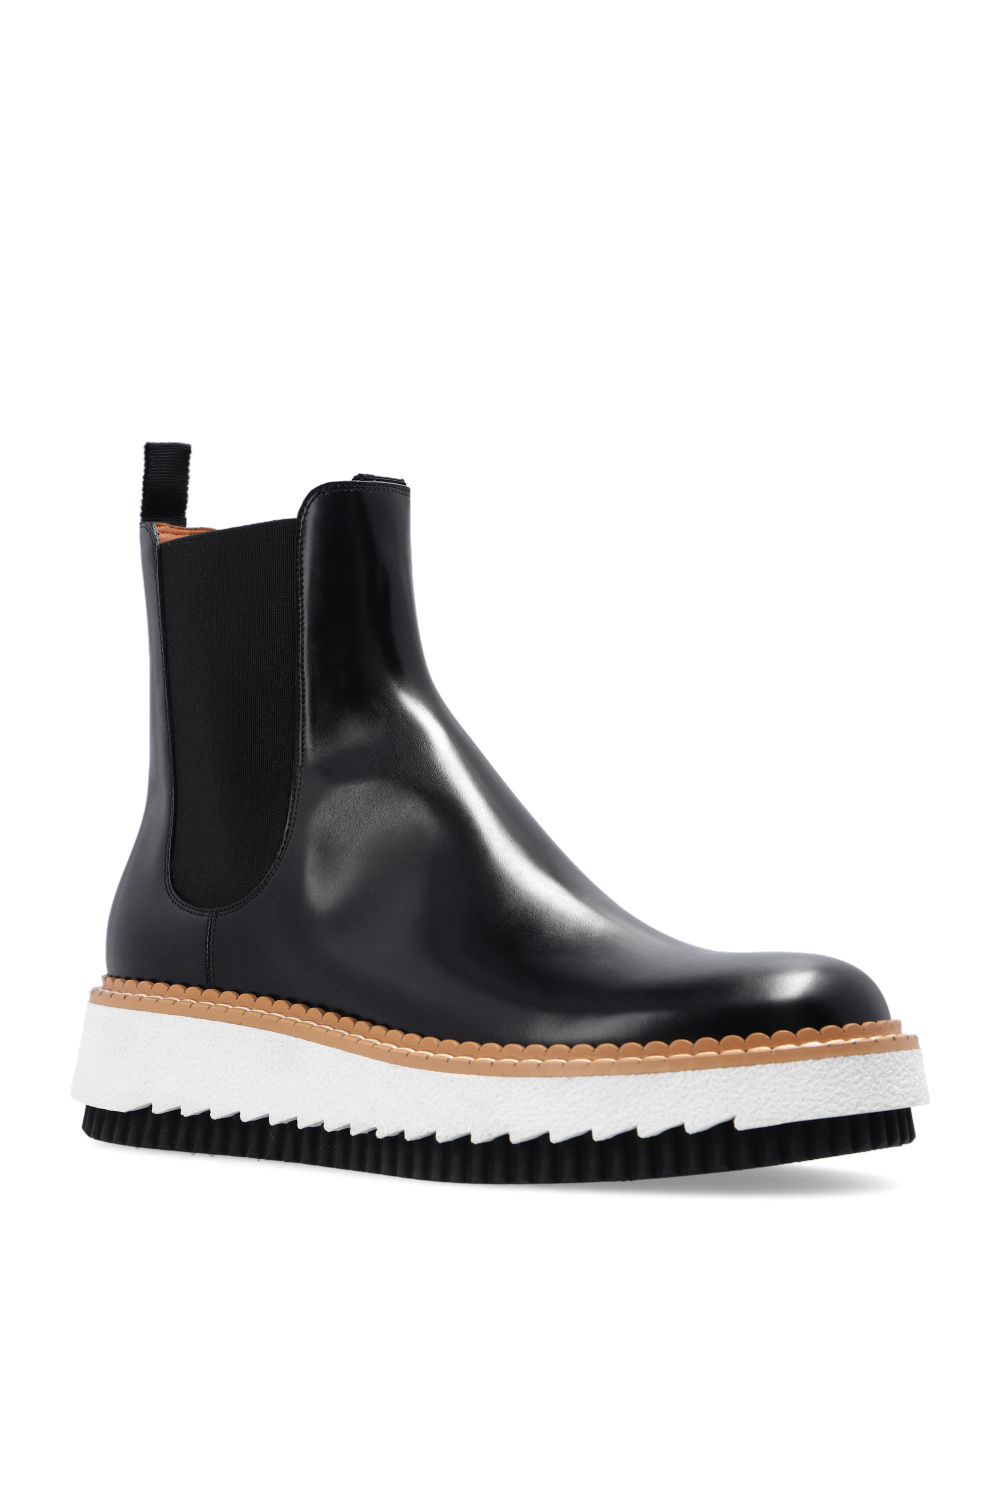 Chloé ‘Chelsea’ leather ankle boots